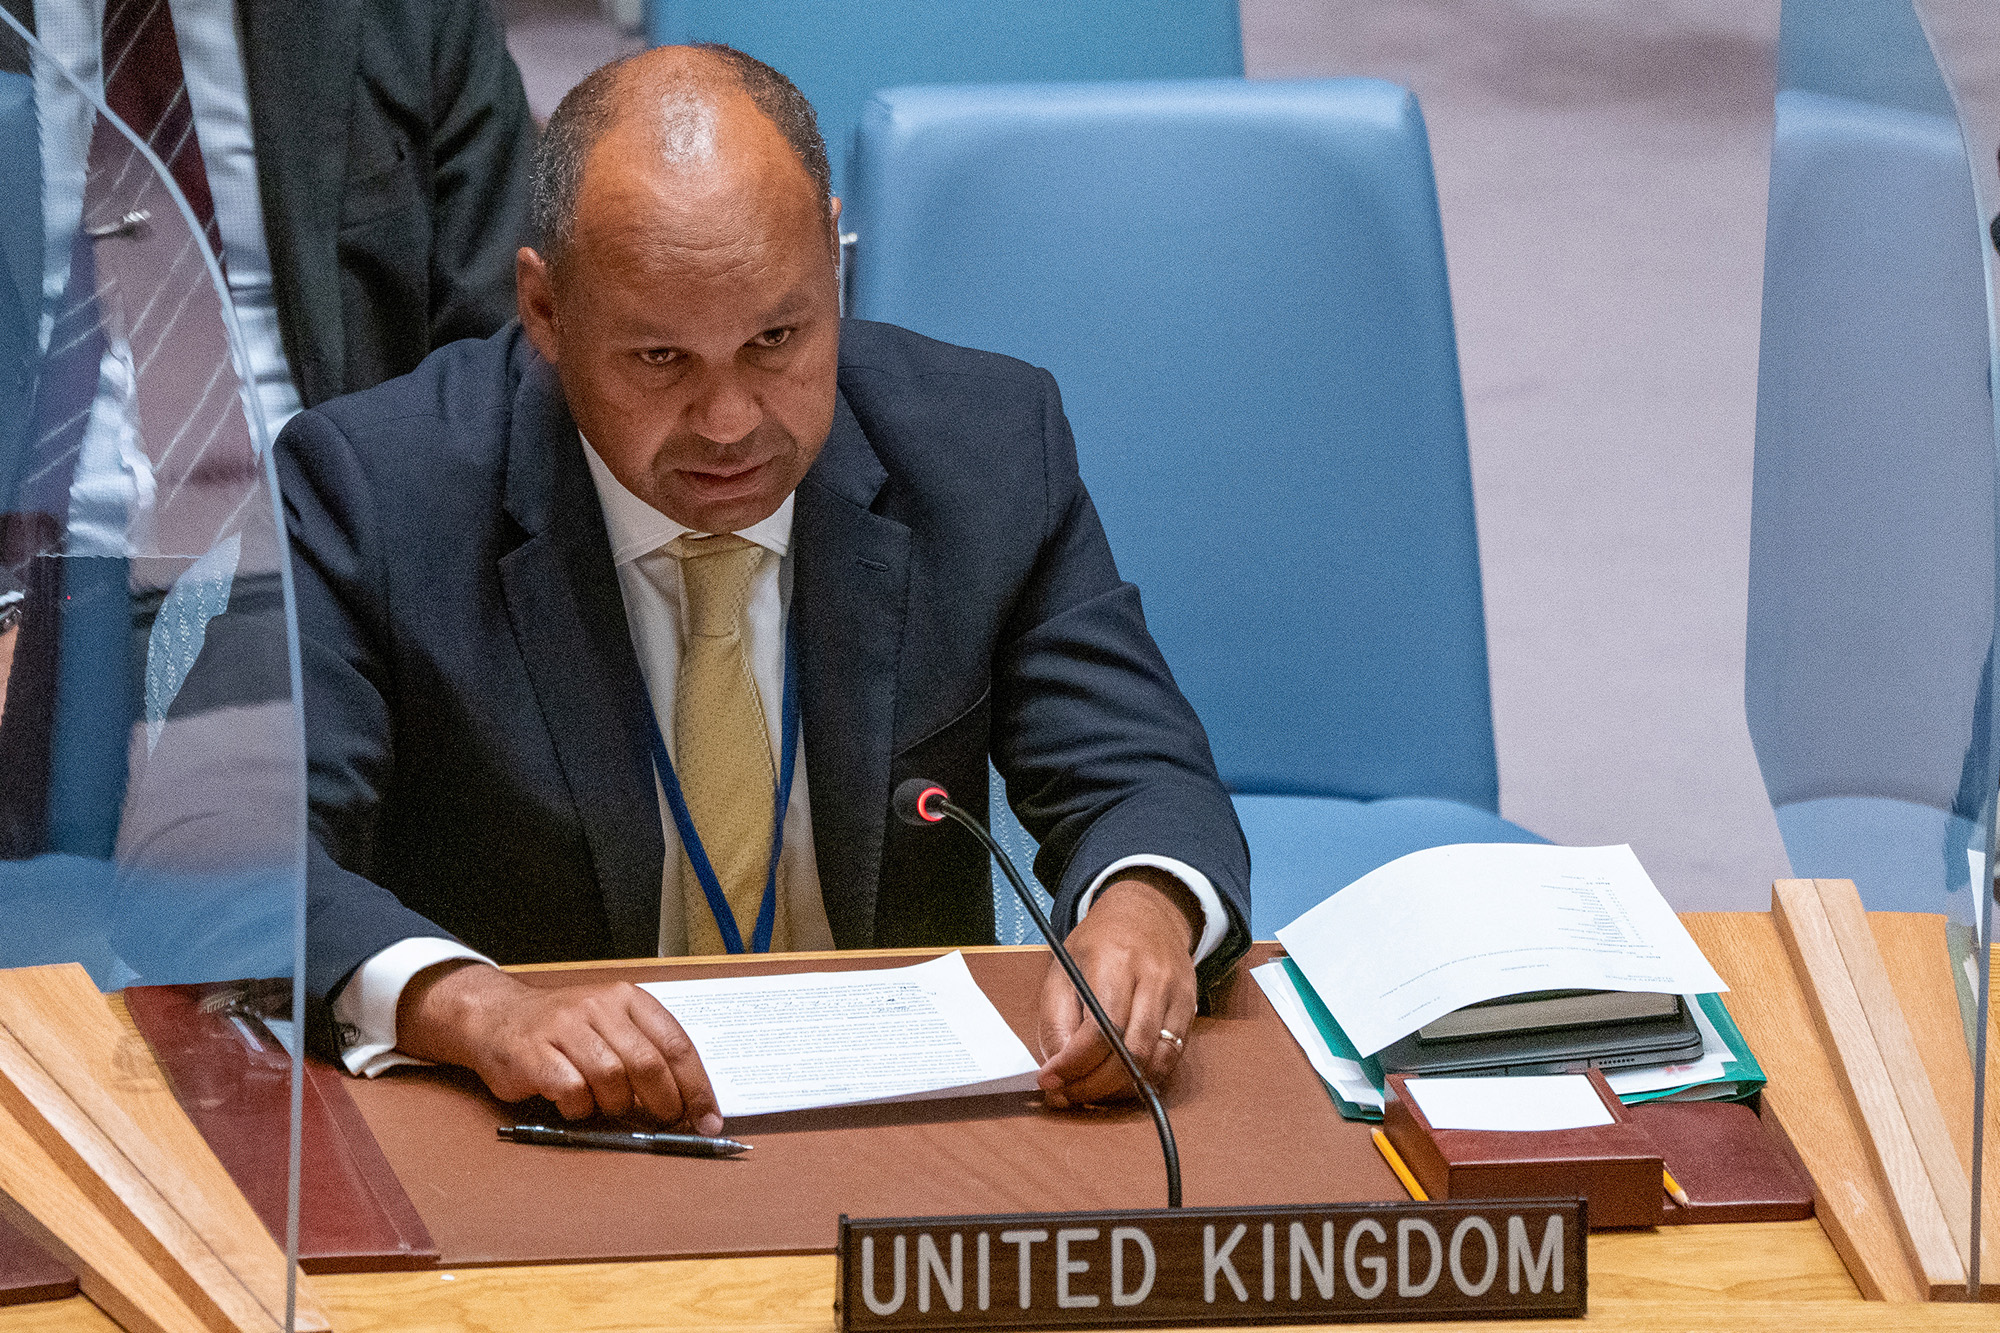 United Kingdom's Deputy Permanent Representative to the UN James Kariuki speaks at the UN Security Council's emergency meeting at the United Nations Headquarters on August 23.